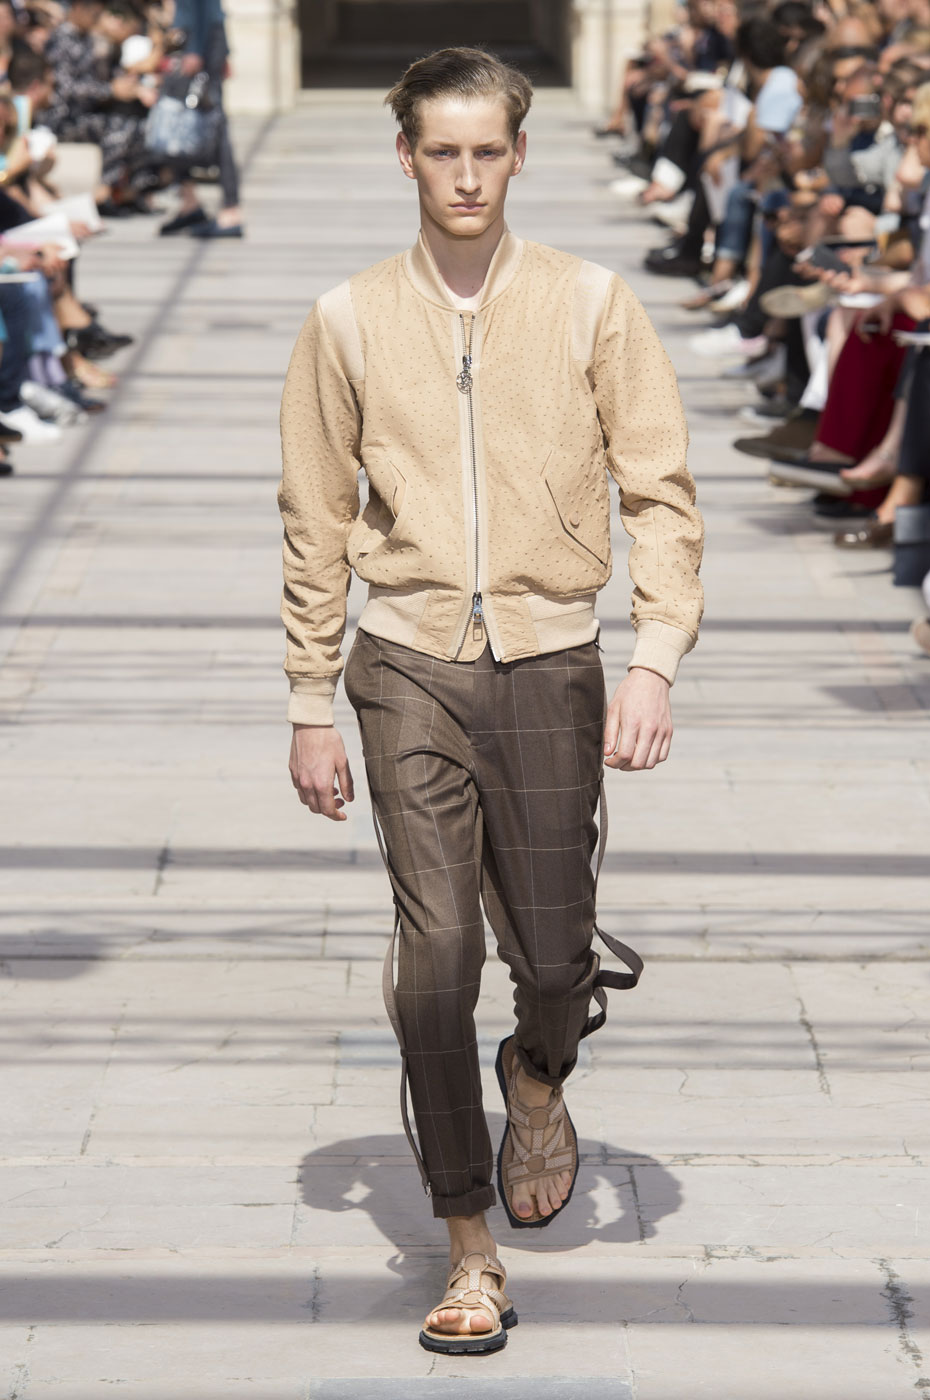 The Perfect Look of the Man Louis Vuitton – Online Shopping Guides